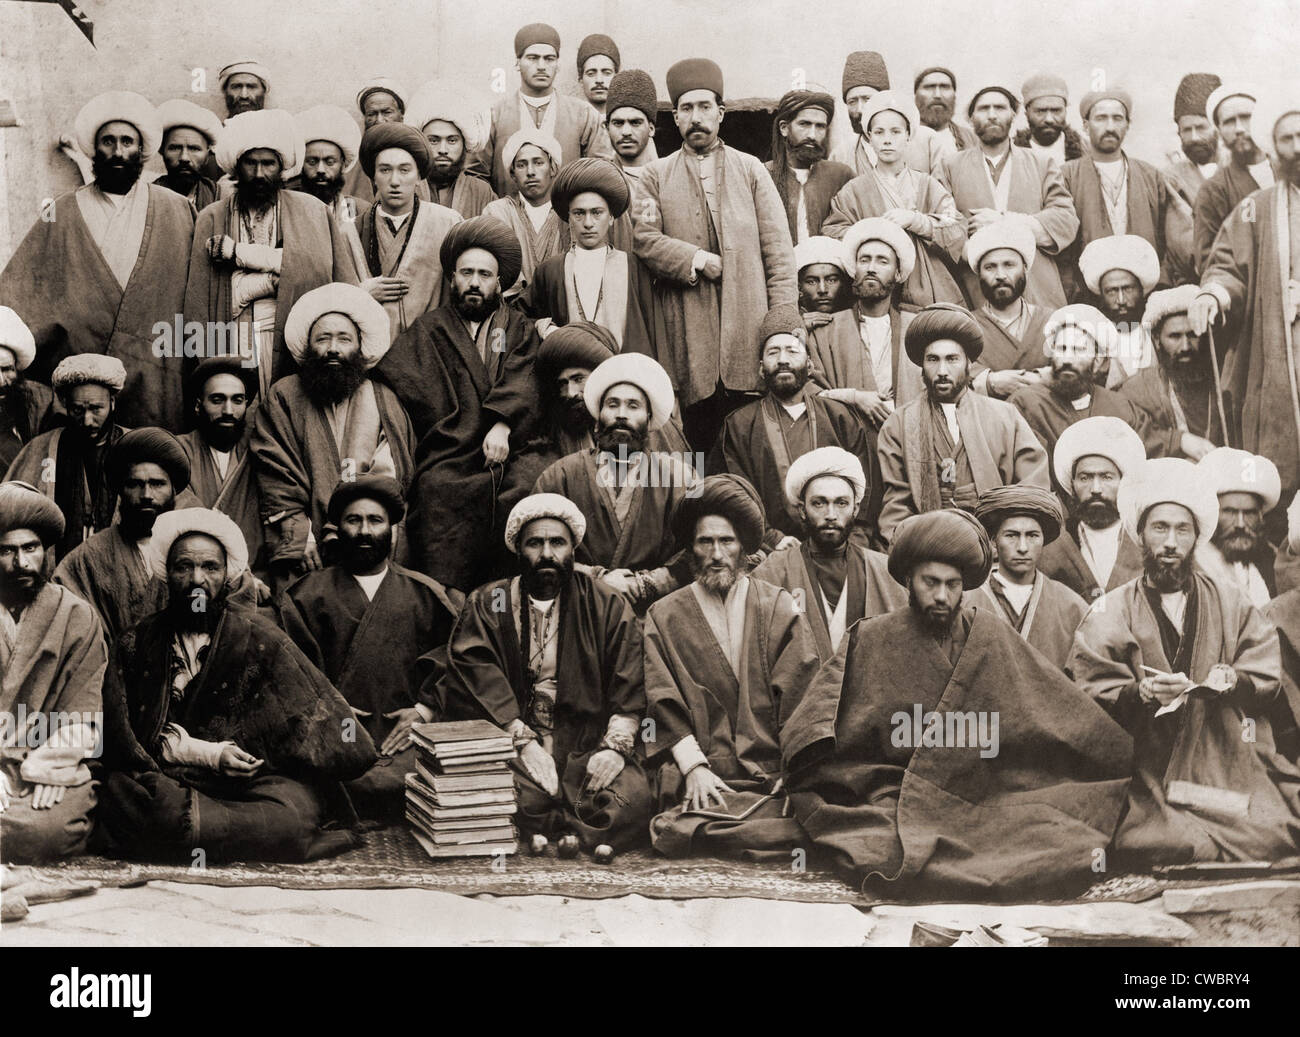 Islamic clerics is Persia, ca. 1910. Reza Shah Pahlavi compromised with the Iranian mullahs when they opposed his imitation of Stock Photo